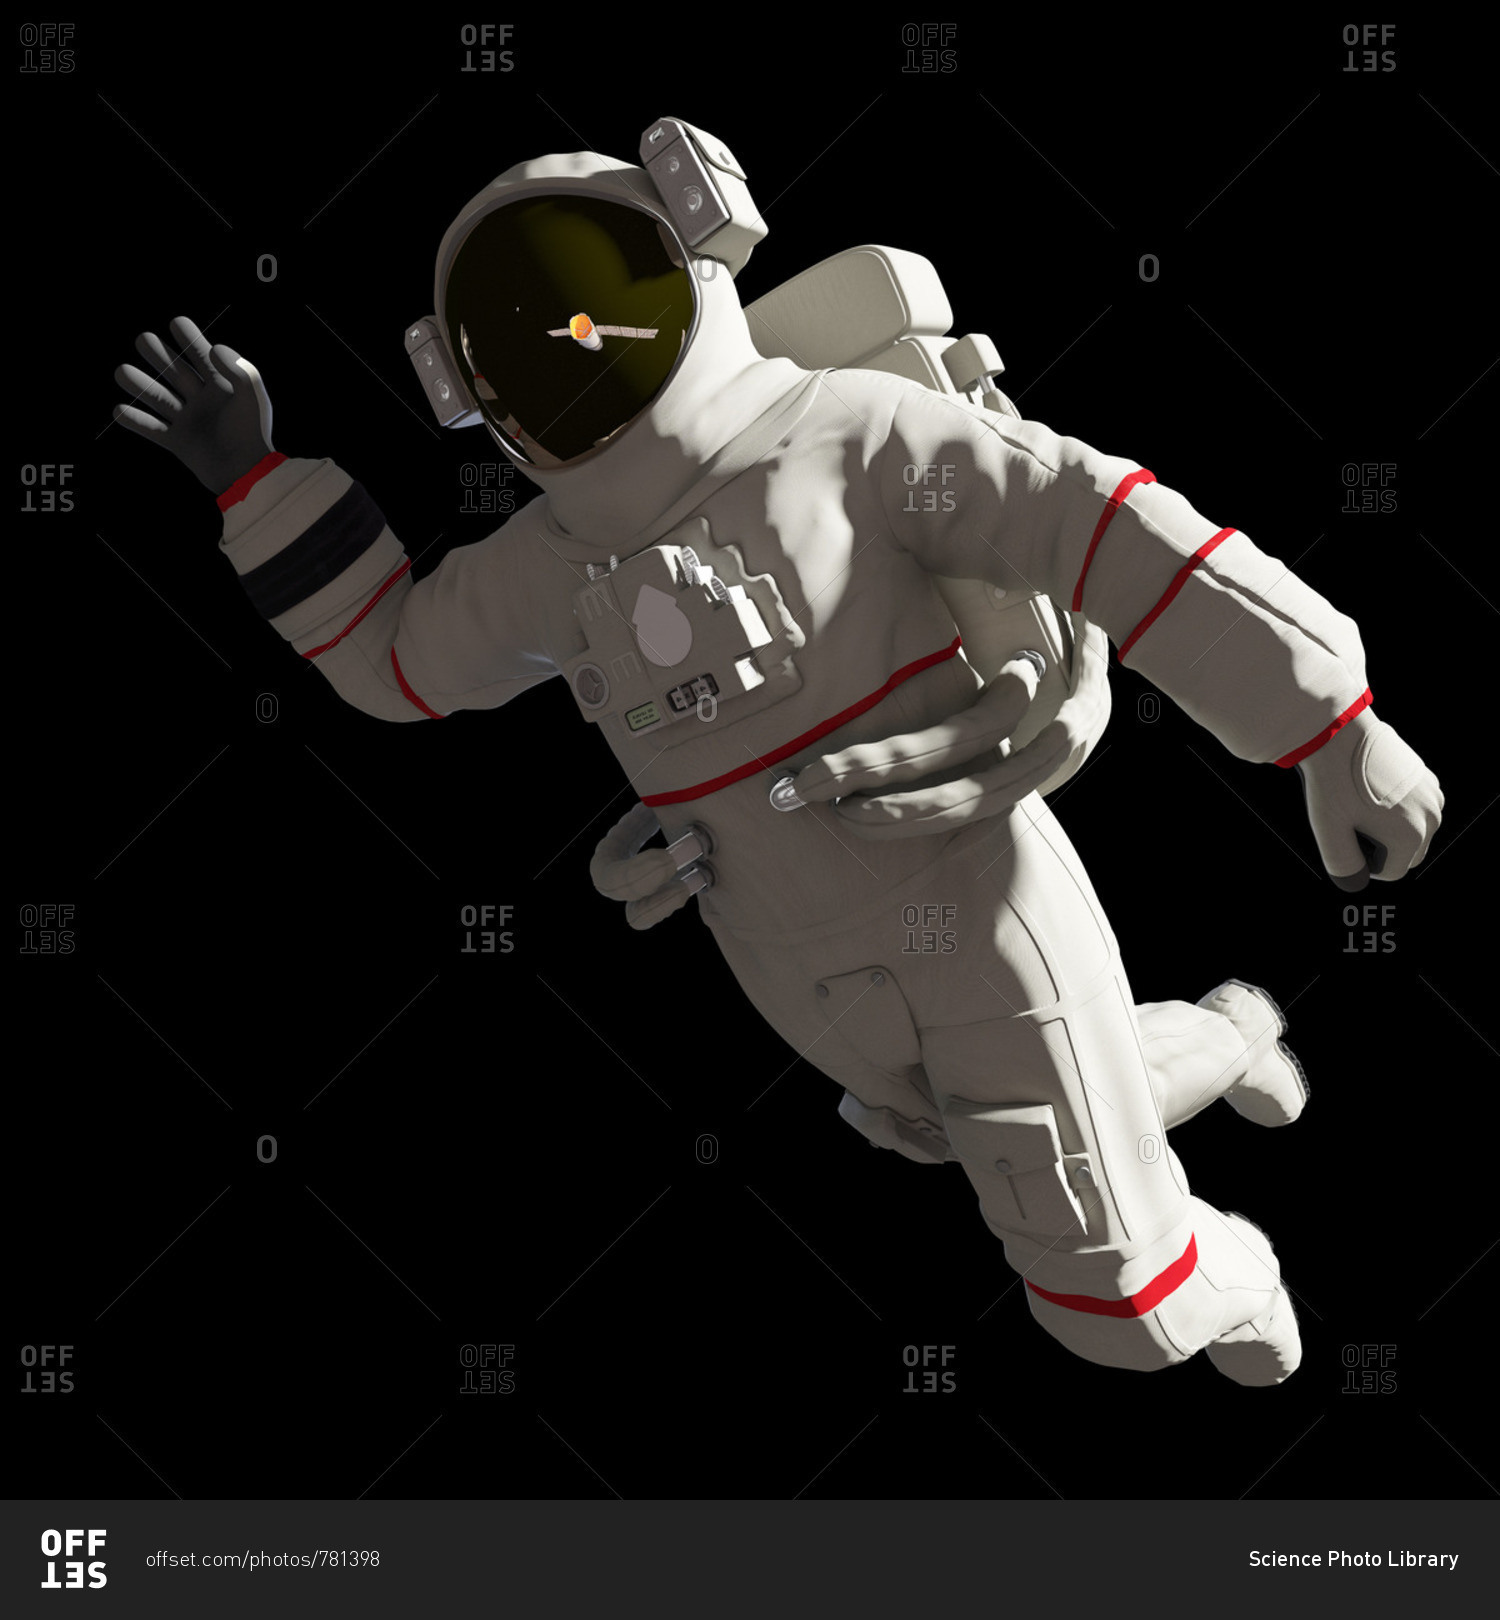 Illustration of an astronaut in space.